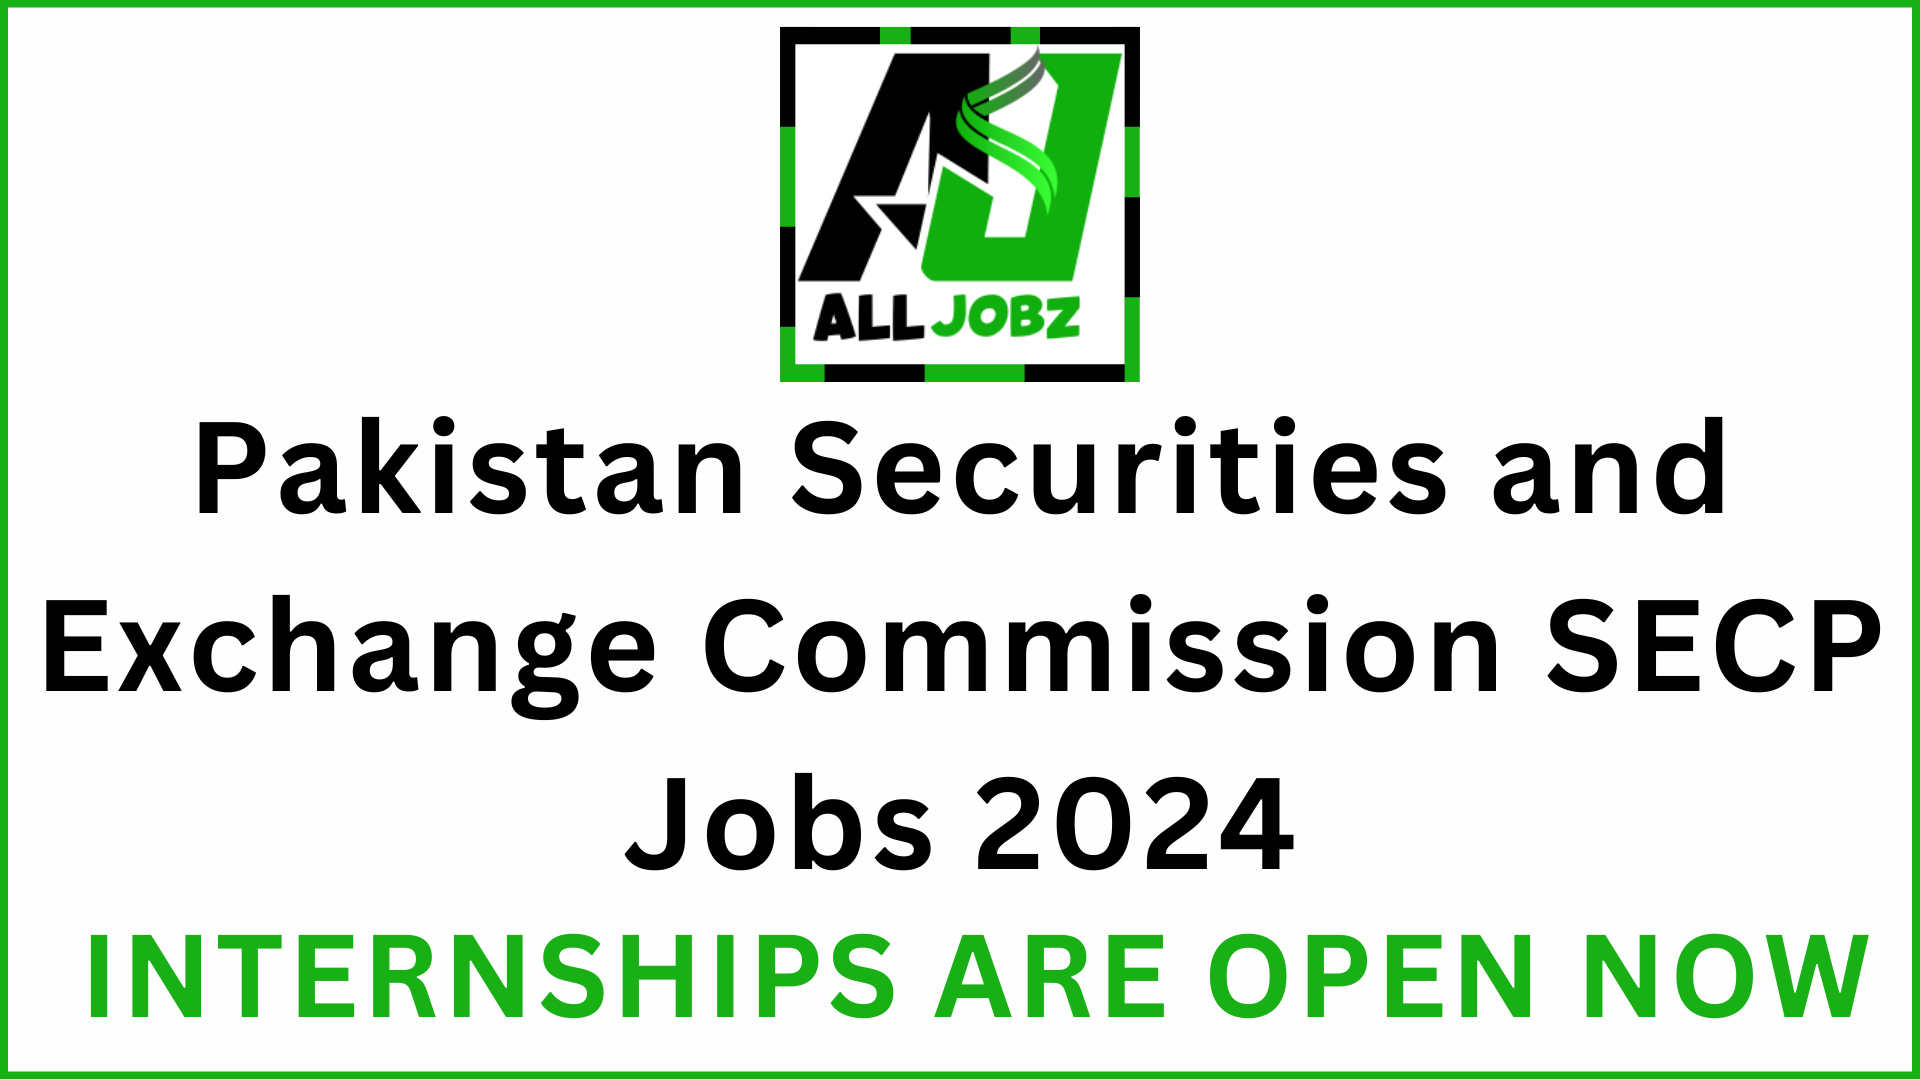 Pakistan Securities And Exchange Commission Secp Jobs 2024, Securities And Exchange Commission Of Pakistan Secp Jobs 2024, Securities And Exchange Commission Of Pakistan Secp Jobs 2024 Apply Online, Securities And Exchange Commission Of Pakistan Jobs 2024, Secp Islamabad Jobs 2024,